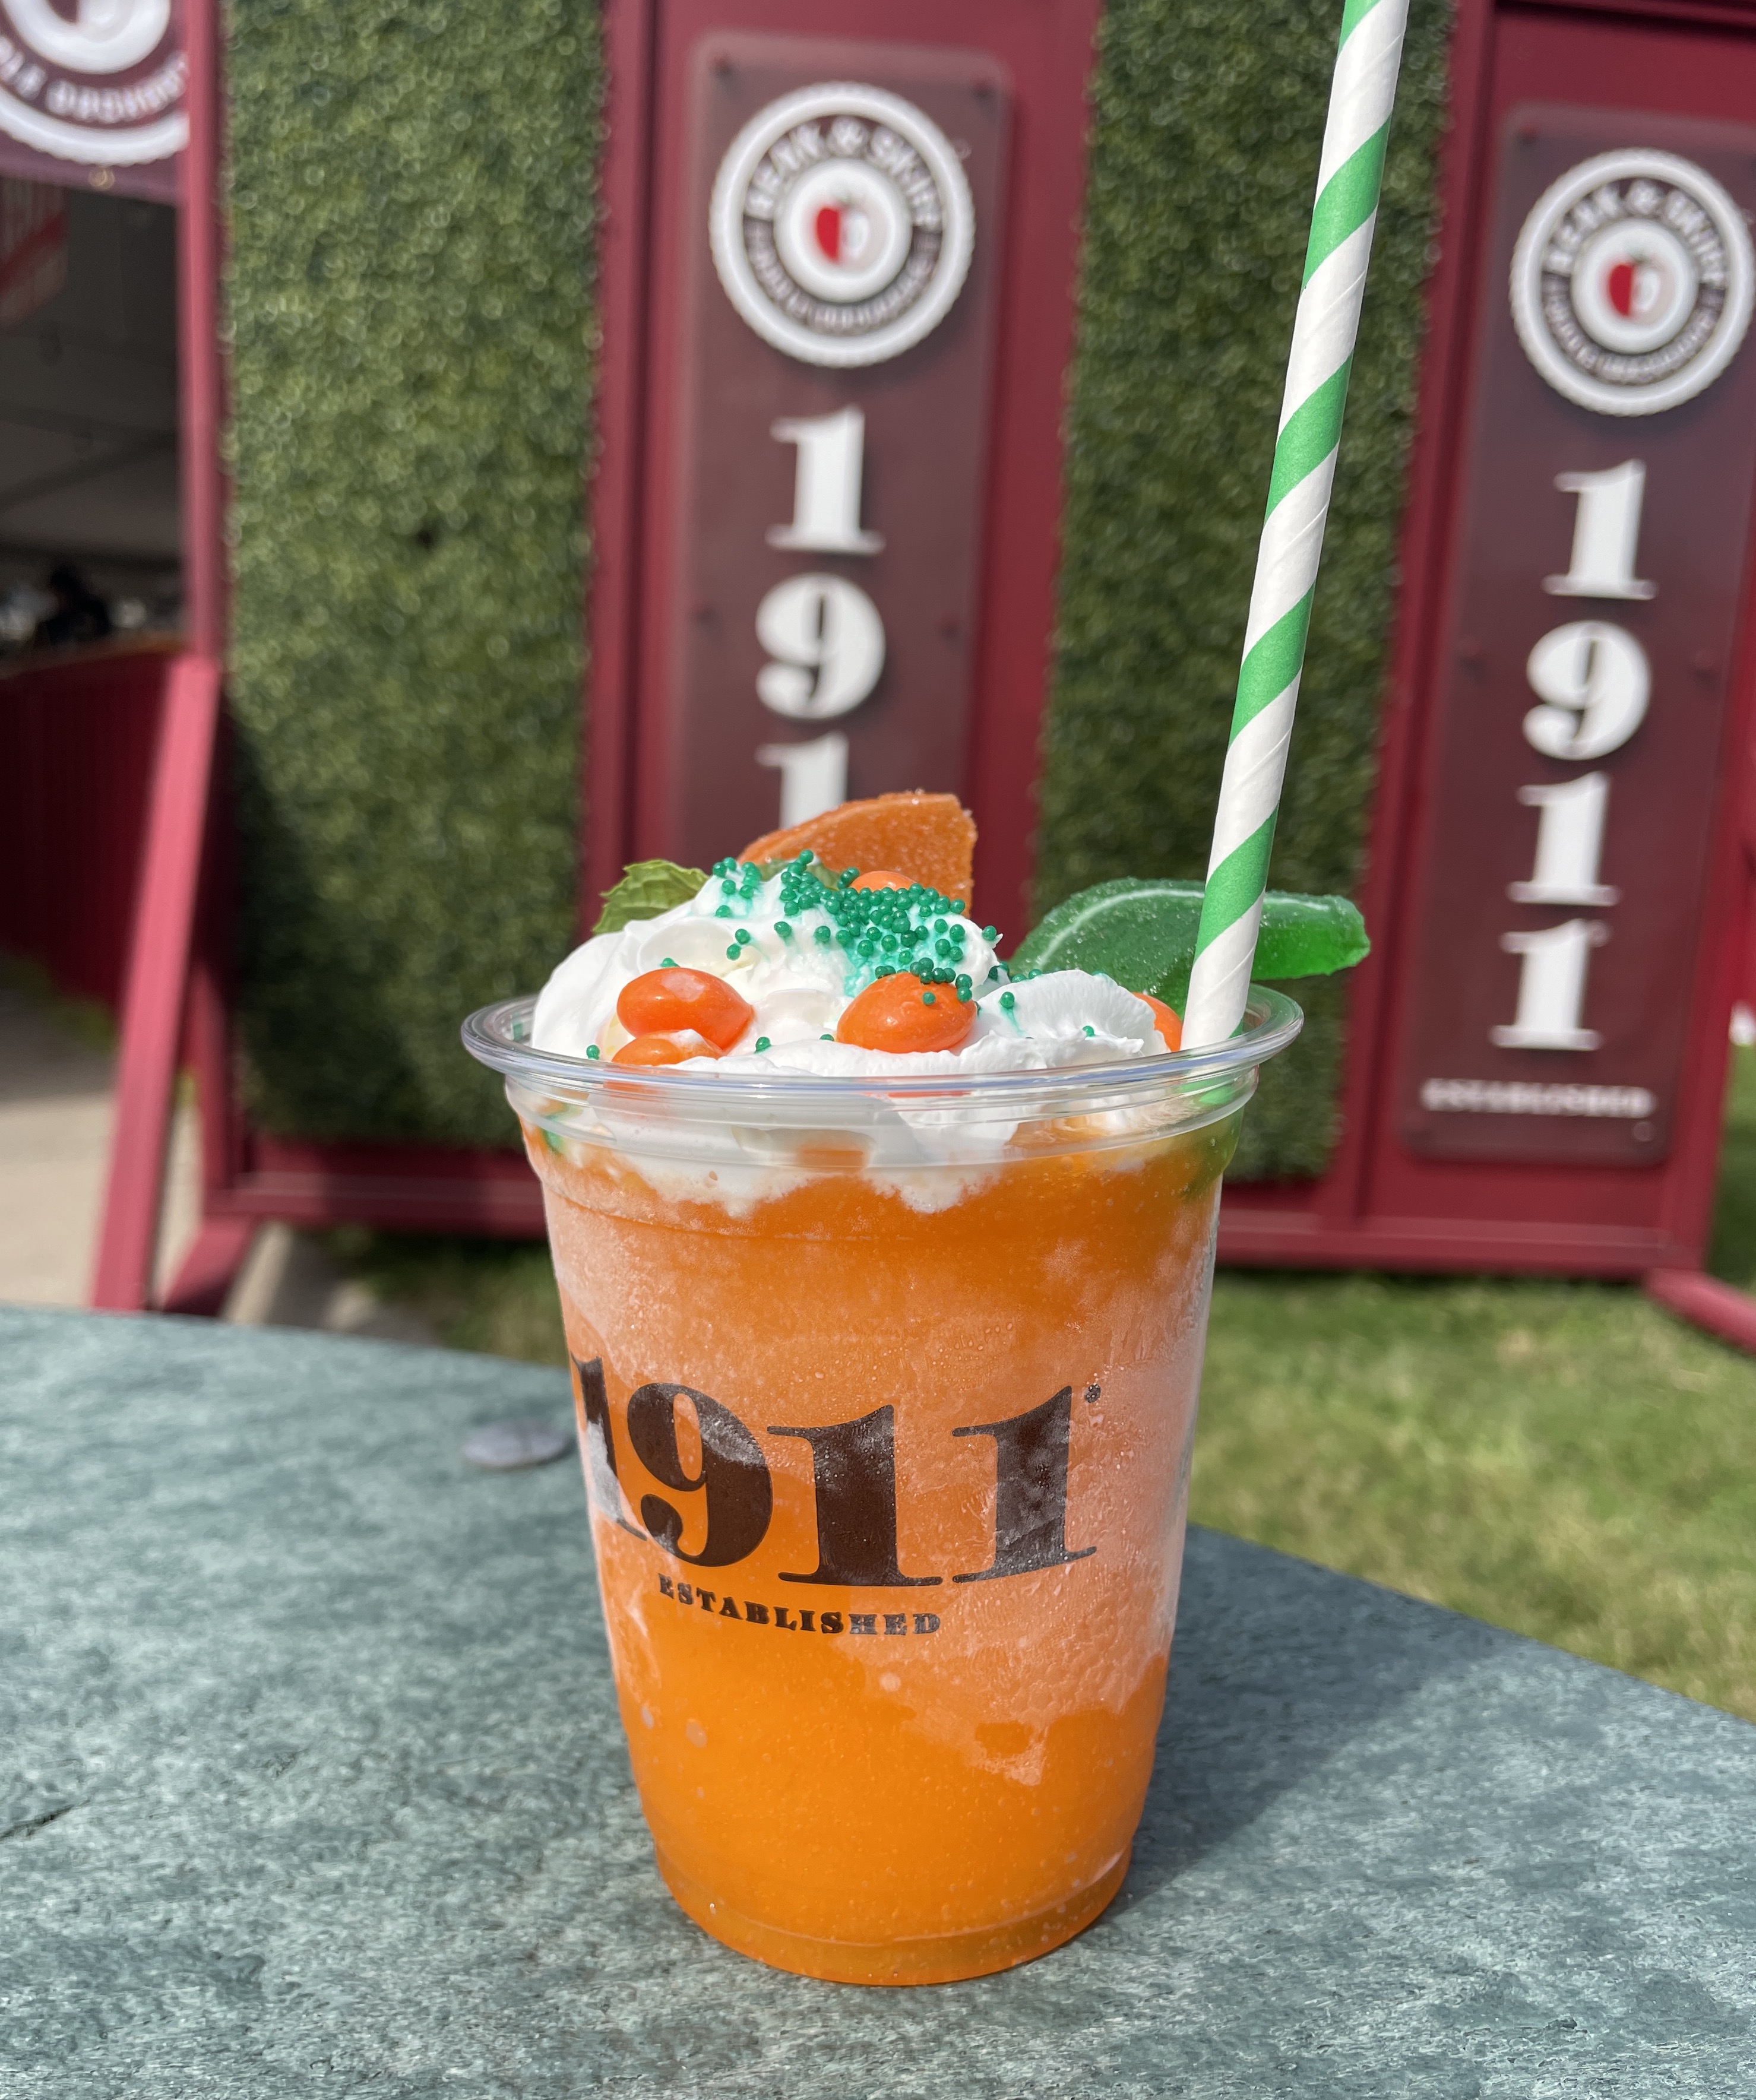 The Kind of a Big Peel cocktail features 1911 Orange Creamsicle Vodka, cream and soda, orange Skittles, Byrne Dairy whipped cream, two candy oranges and a spring of fresh mint. (Katrina Tulloch)